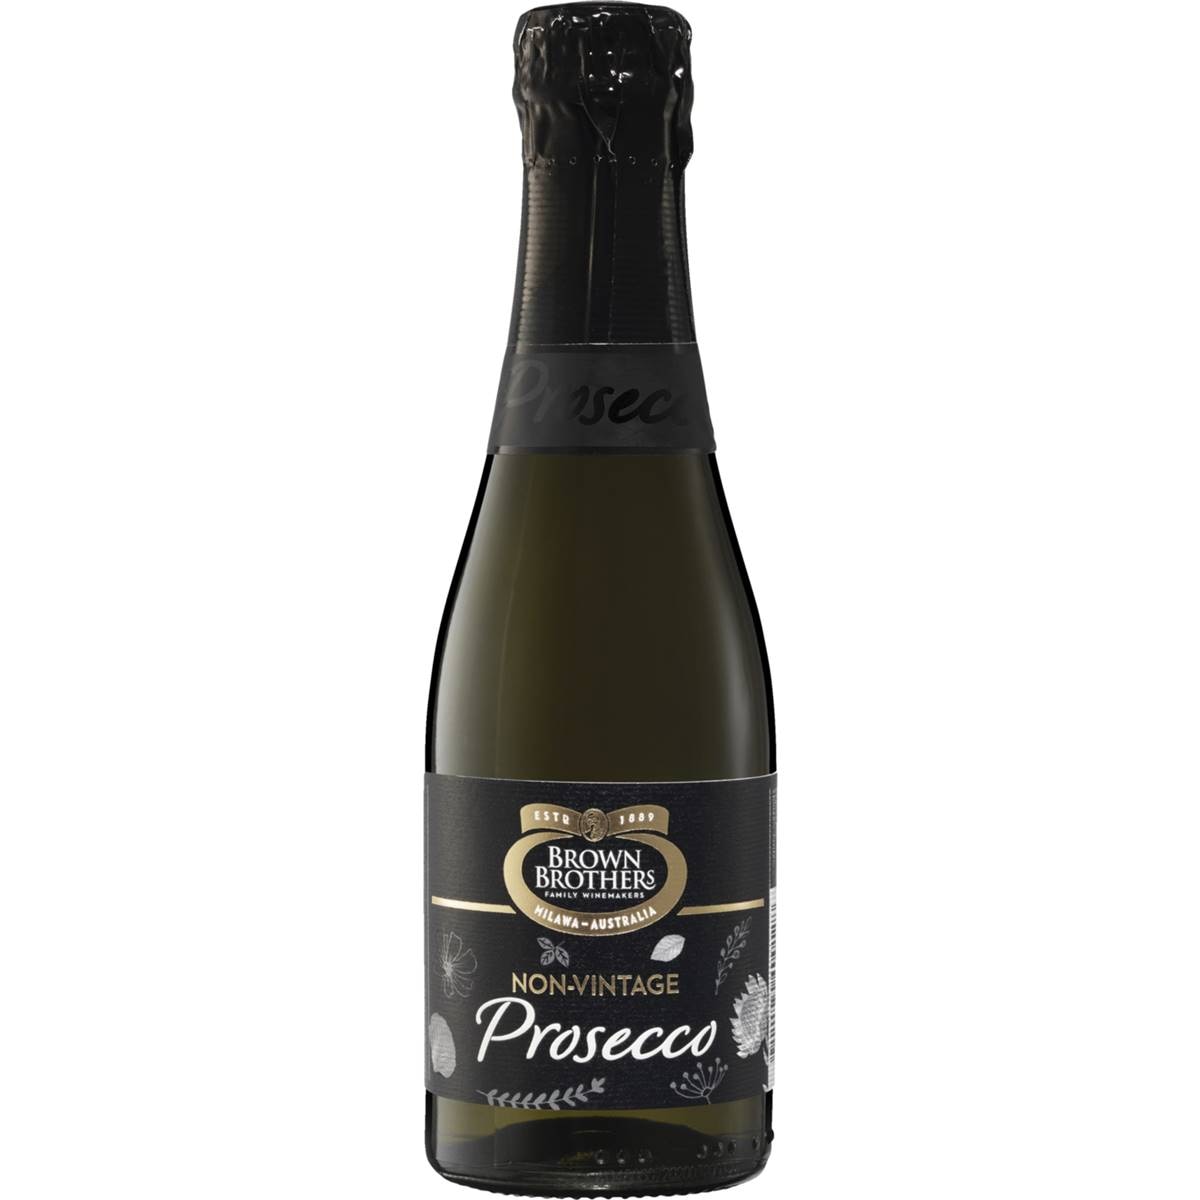 Calories in Brown Brothers Prosecco Nv